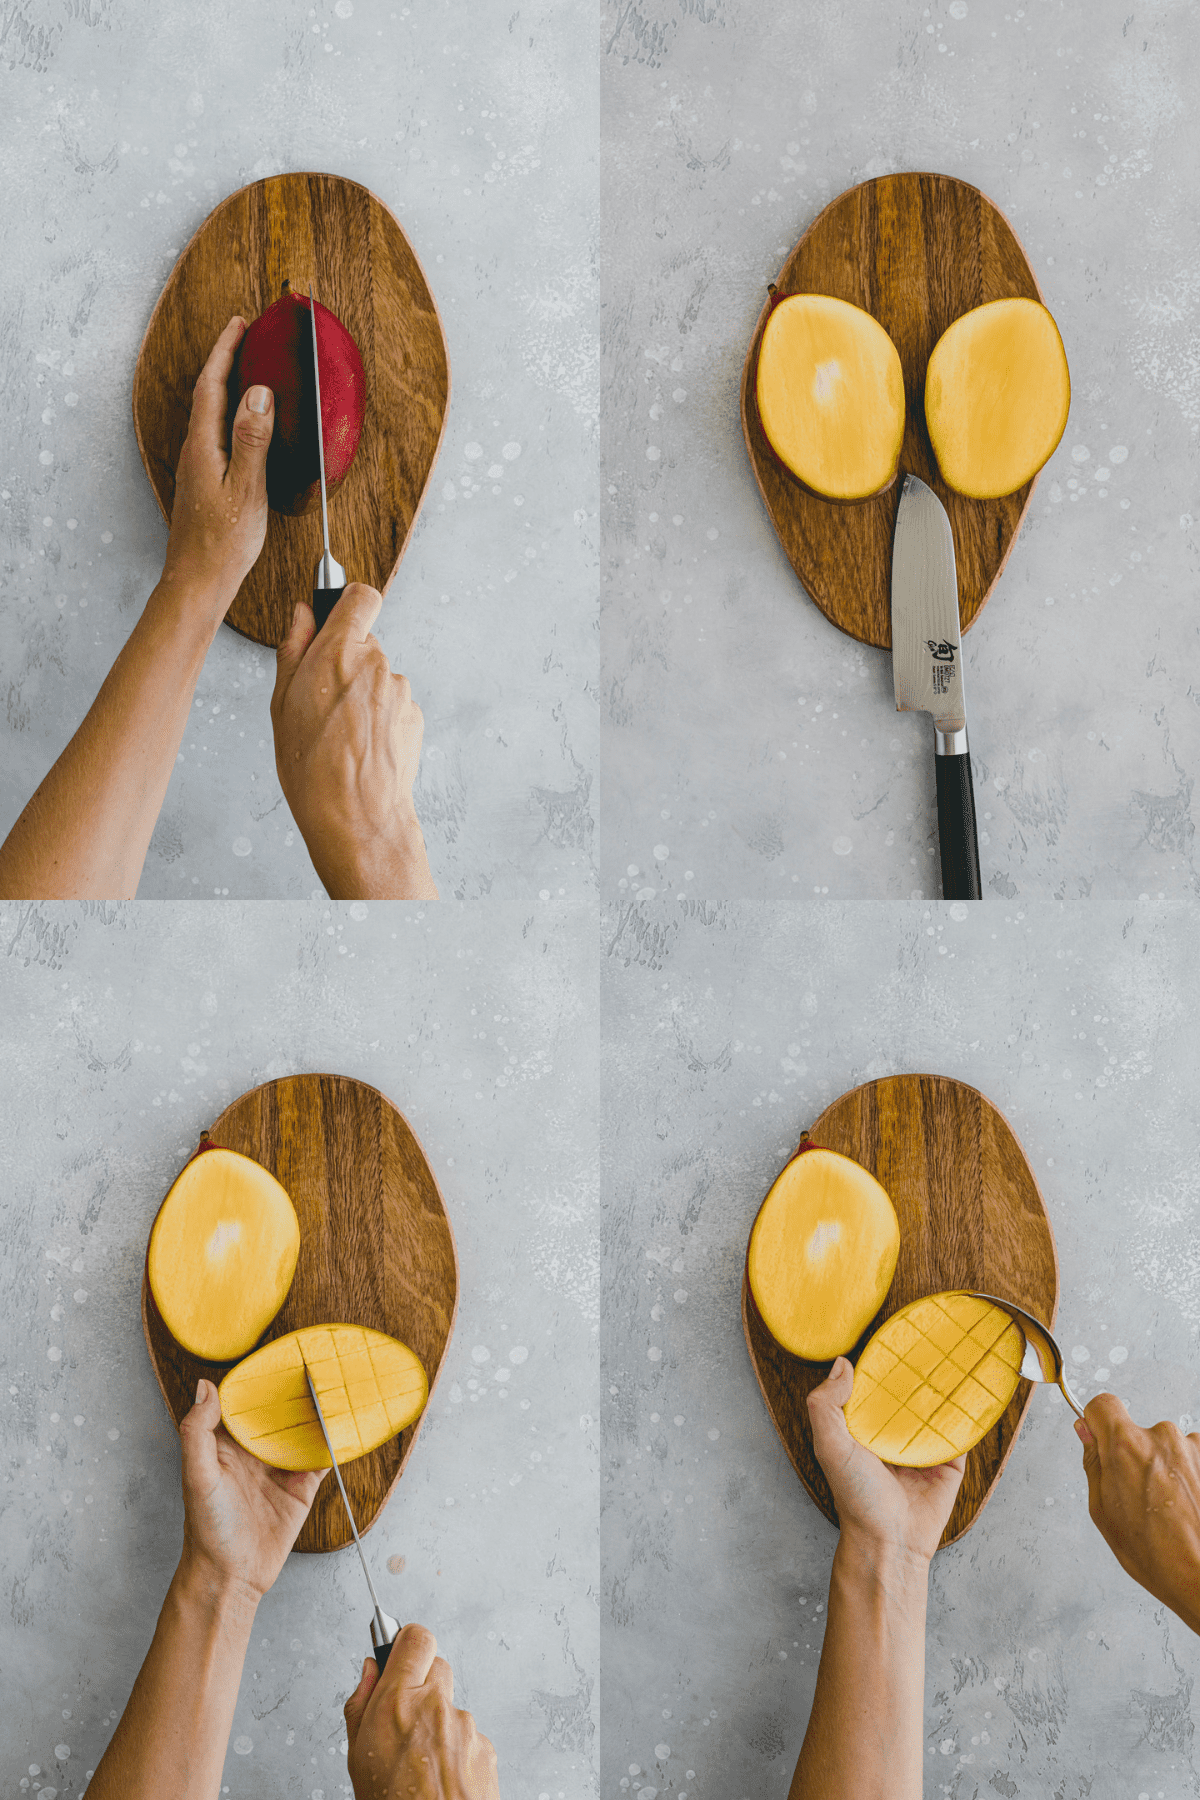 Gallery of 4 photos, 2 on the top and 2 on the bottom in equal size. Each photo is a top view of a chopping board, in the top left photo of a mango being chopped in half, the top right photo is two halves of a mango lying on a chopping board with a knife below it. The bottom left photo is of one of the mango halves being diced inside and the bottom right photo shows the mango dices being scraped out of the mango skin with a spoon. 